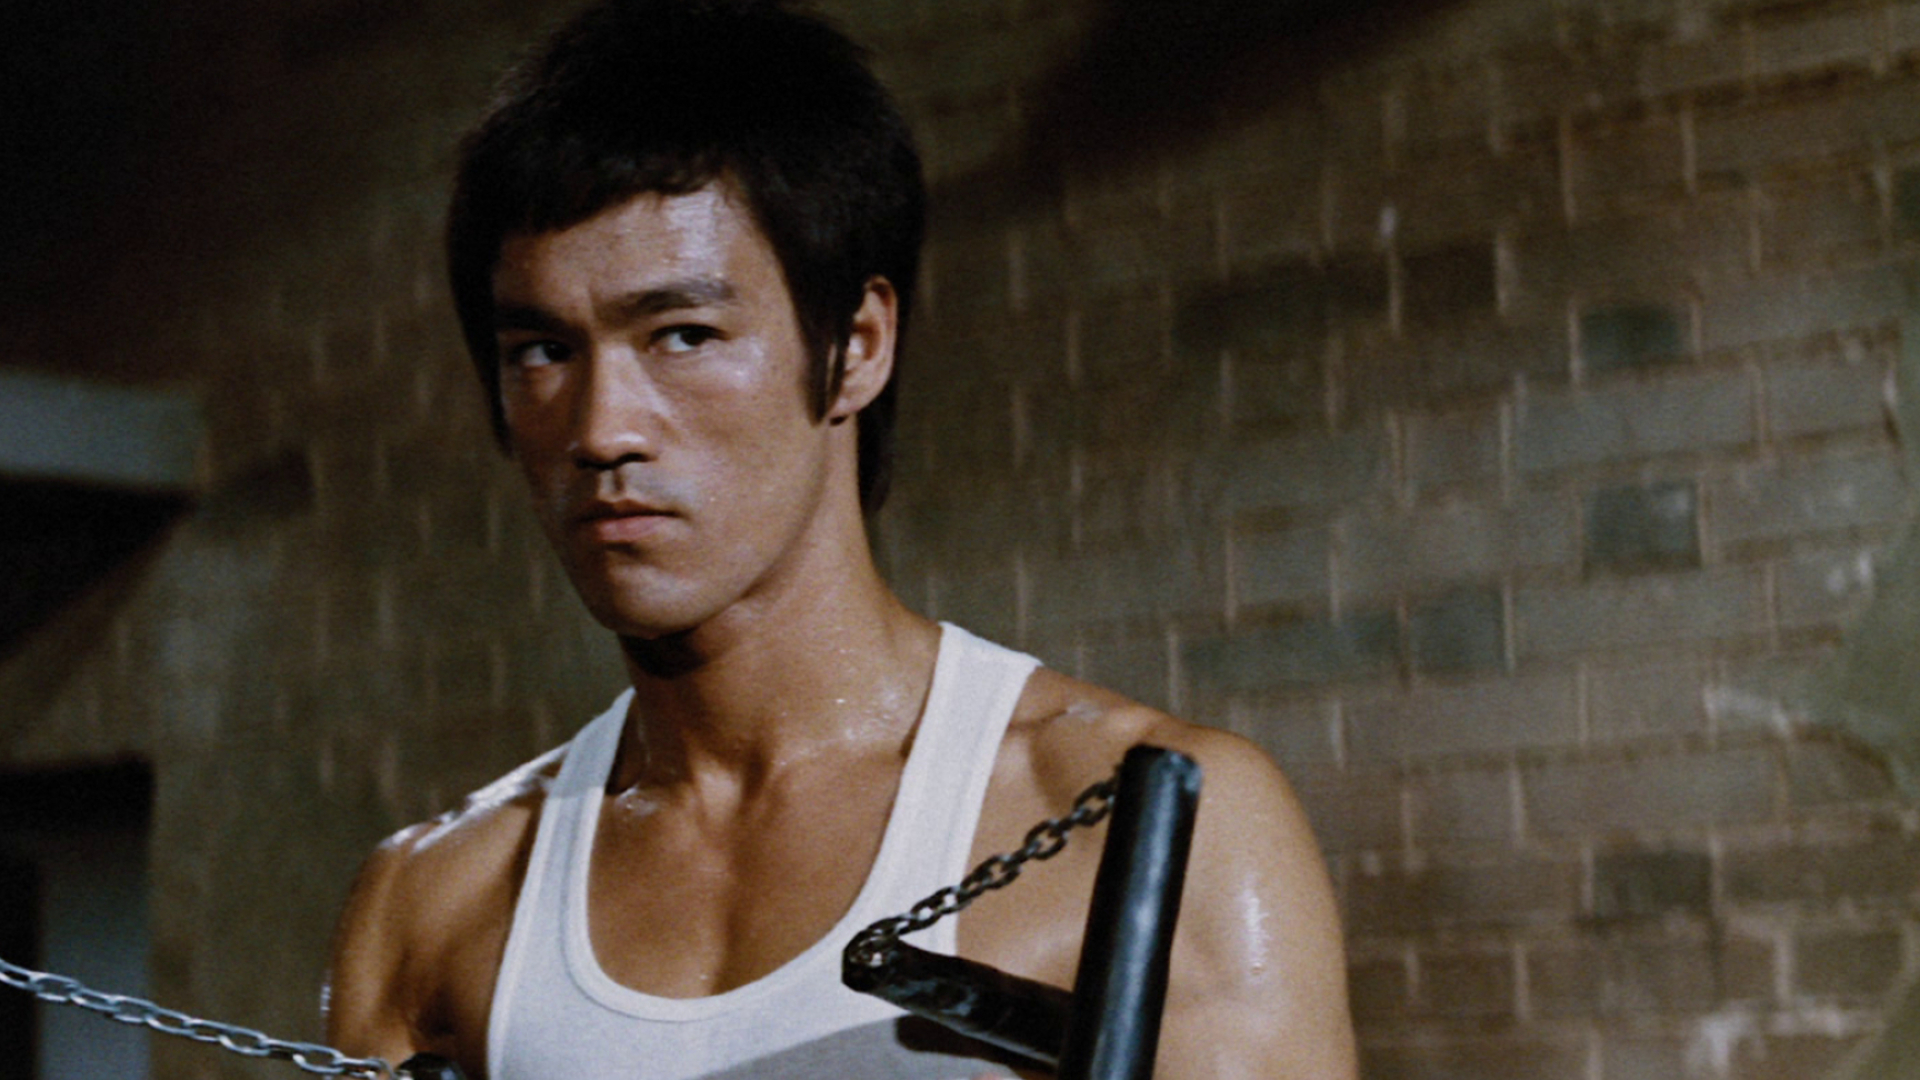 The Way of the Dragon: Bruce Lee as Tang Lung, a young martial artist. 1920x1080 Full HD Wallpaper.